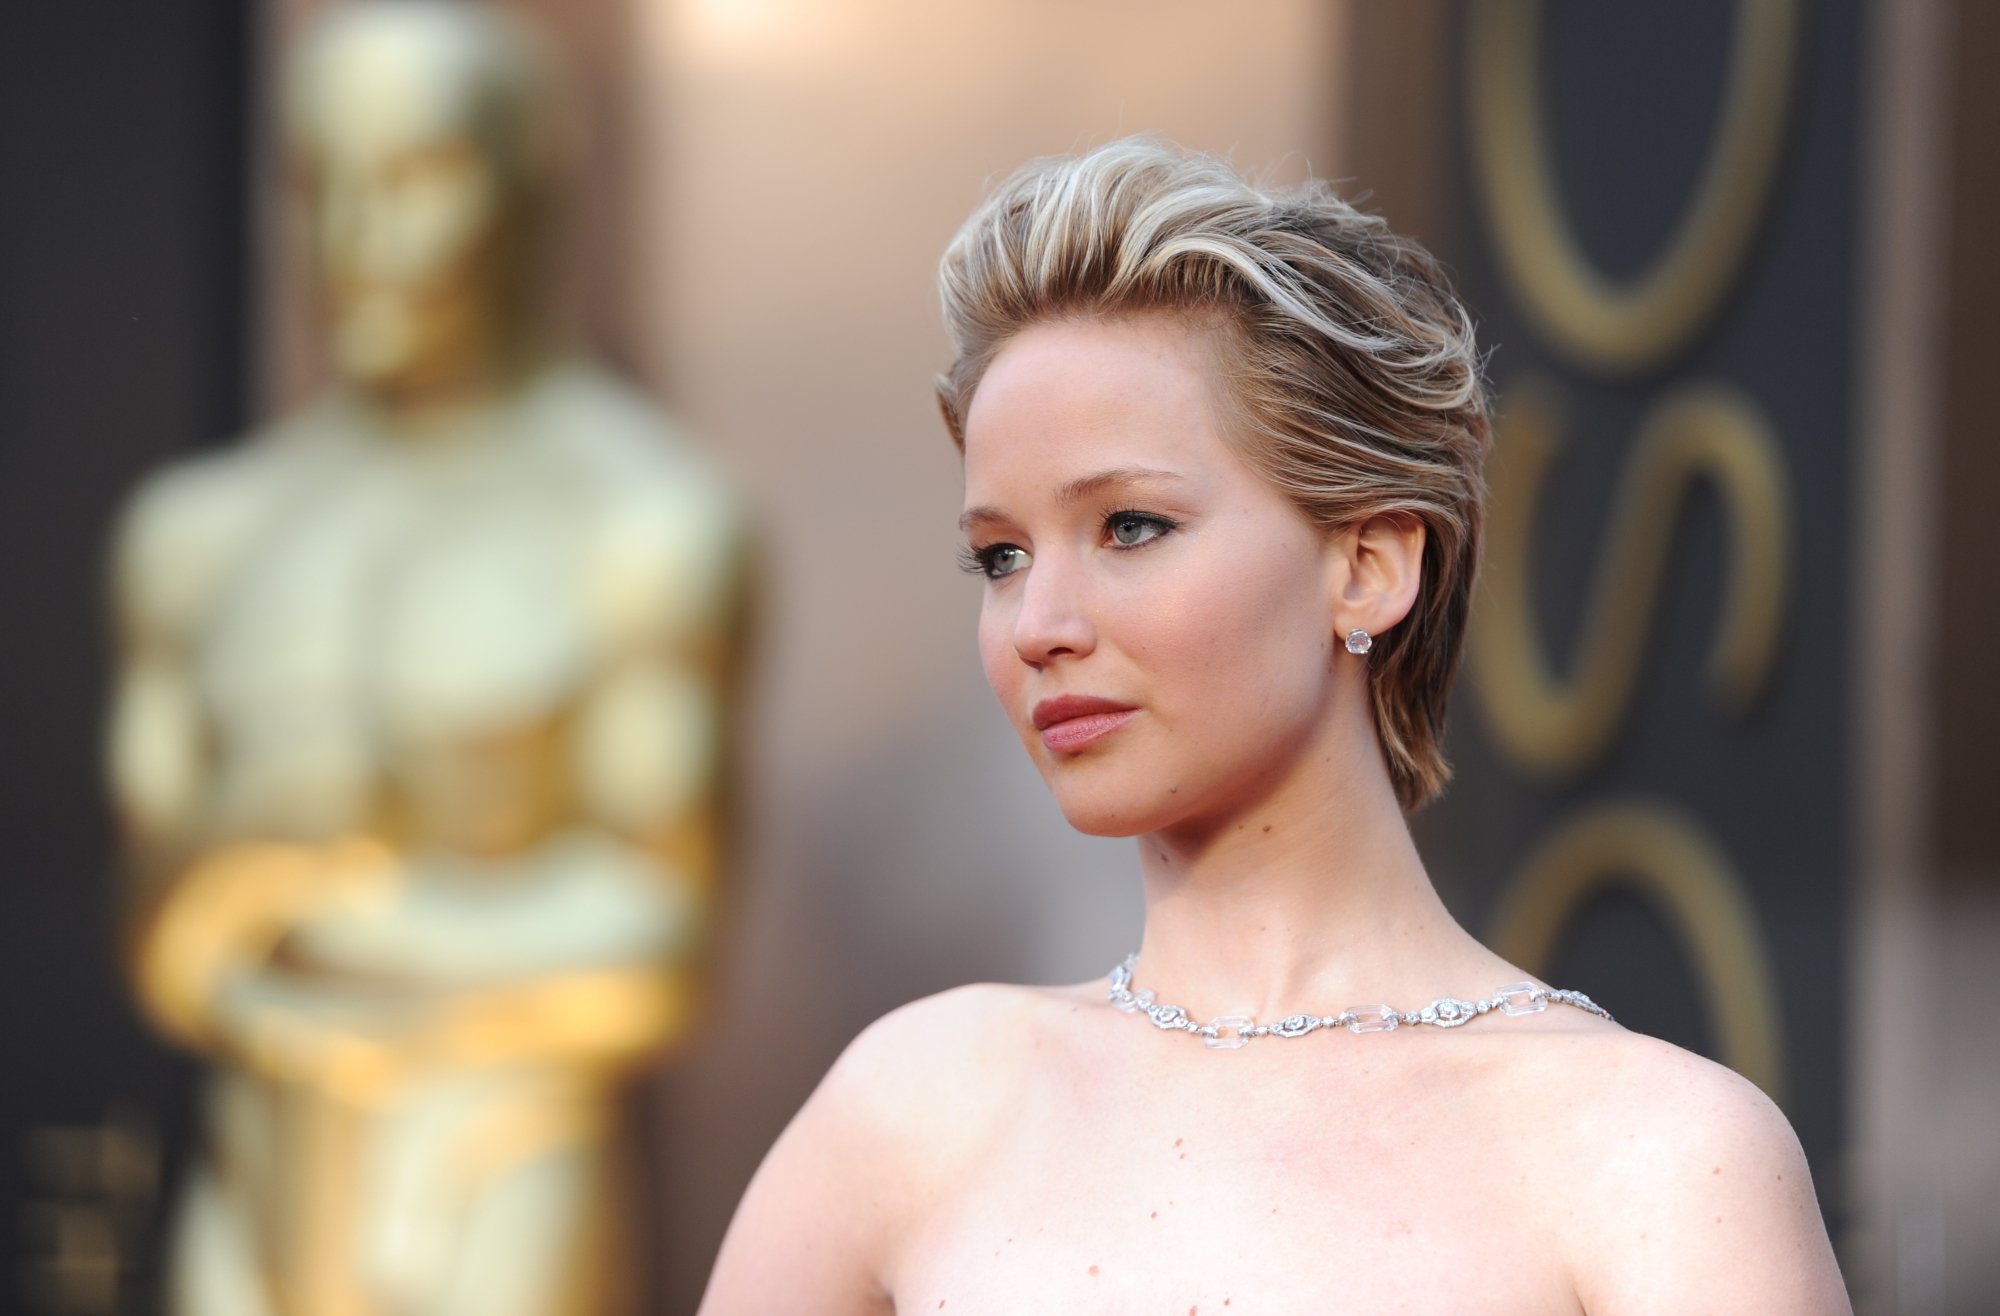 'American Hustle' actor Jennifer Lawrence standing in front of an Oscar award statue